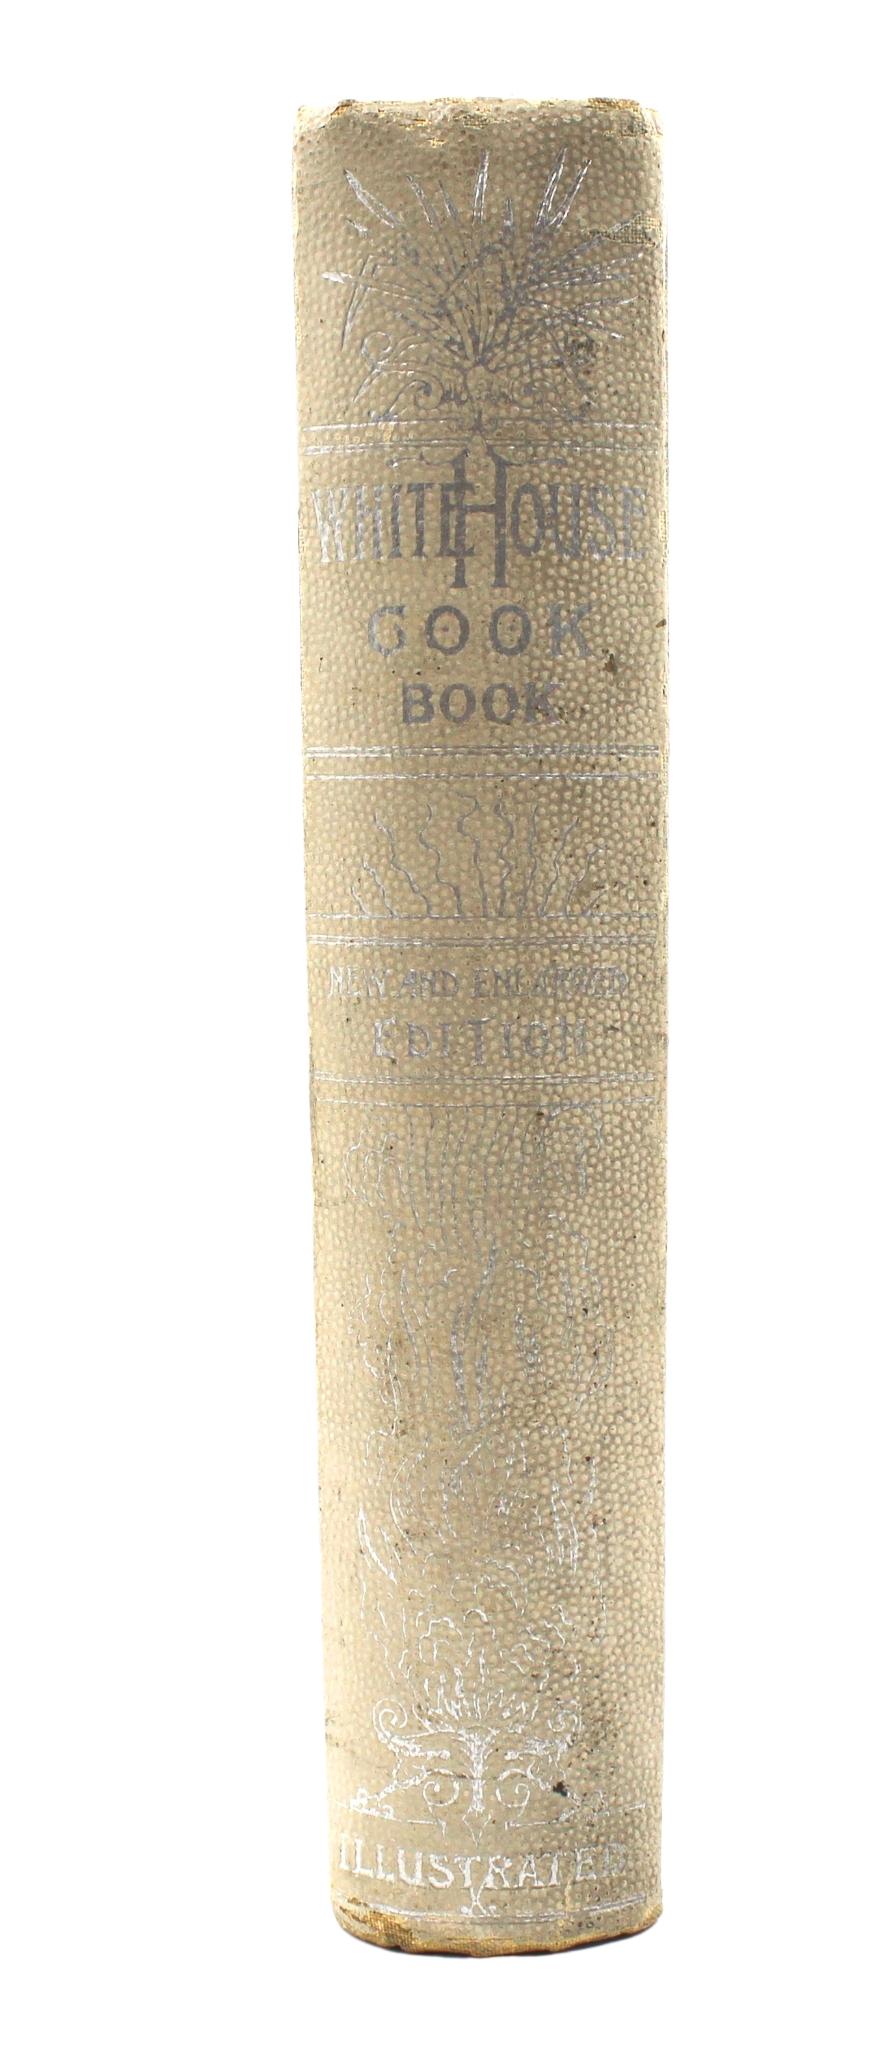 Embossed The White House Cookbook by F. L. Gillette, Later Printing, 1894 For Sale